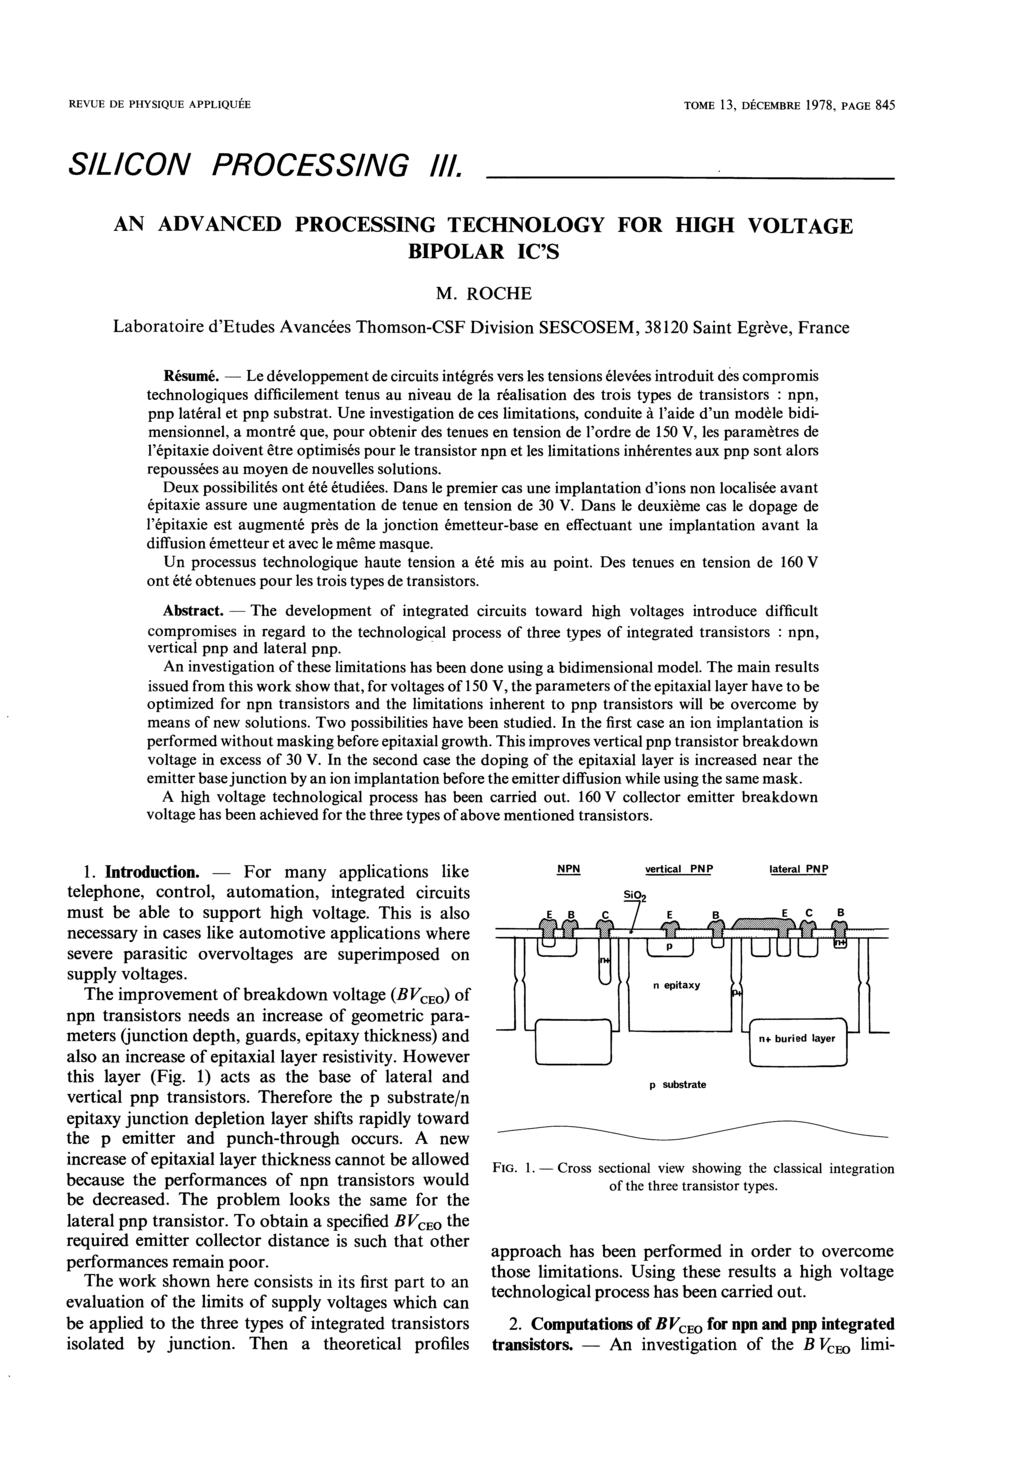 For Le The Cross An REVUE DE PHYSIQUE APPLIQUÉE TOME 13, DÉCEMBRE 1978, 845 SILICON PROCESSING III. AN ADVANCED PROCESSING TECHNOLOGY FOR HIGH VOLTAGE BIPOLAR IC S M.